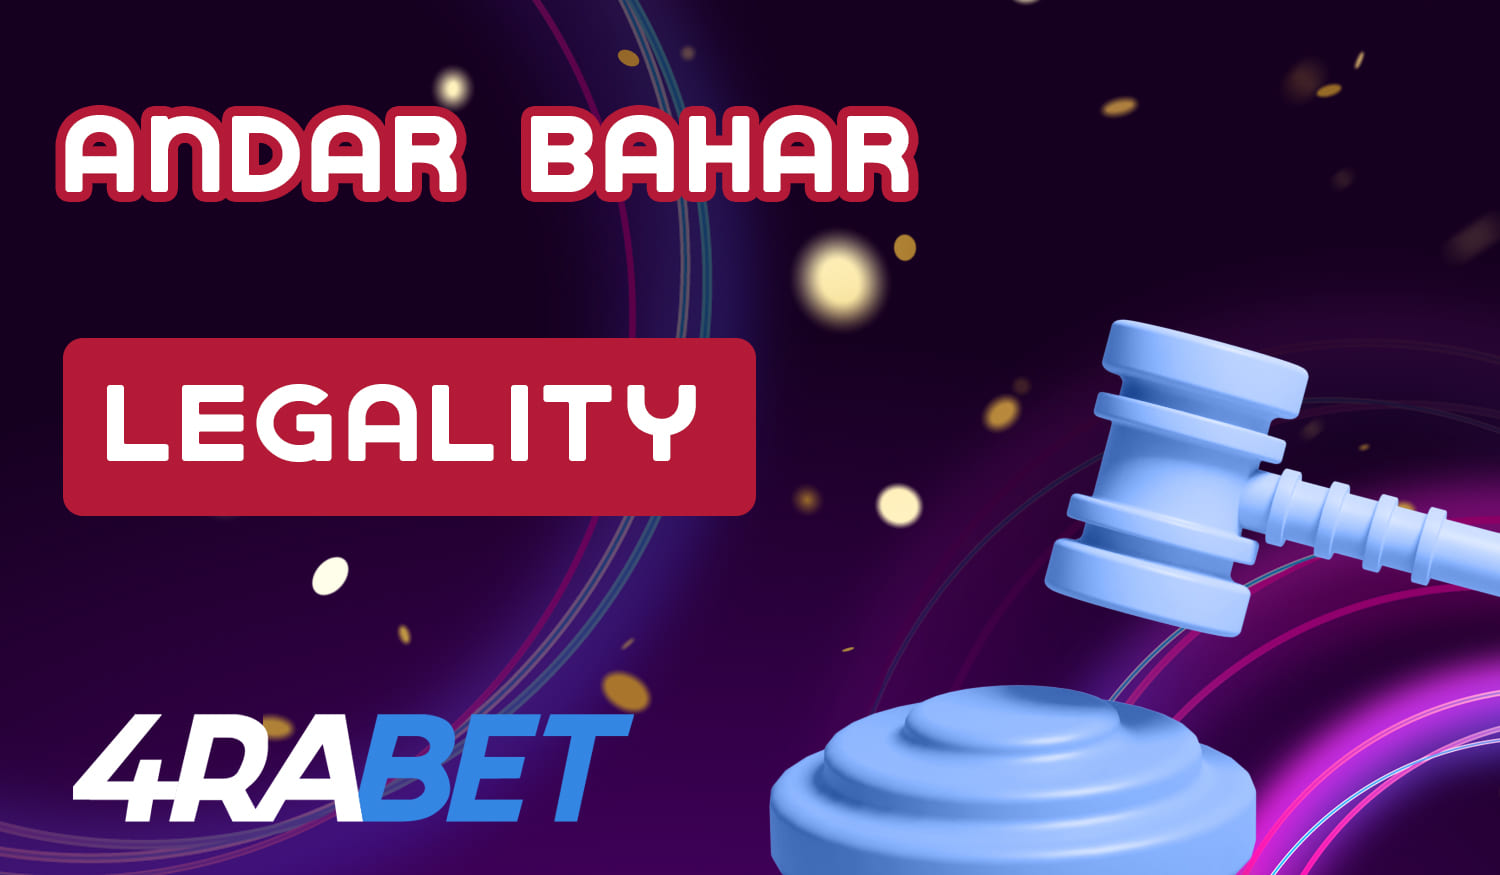 Is it legal to play Andar Bahar for Indian users at 4raBet 